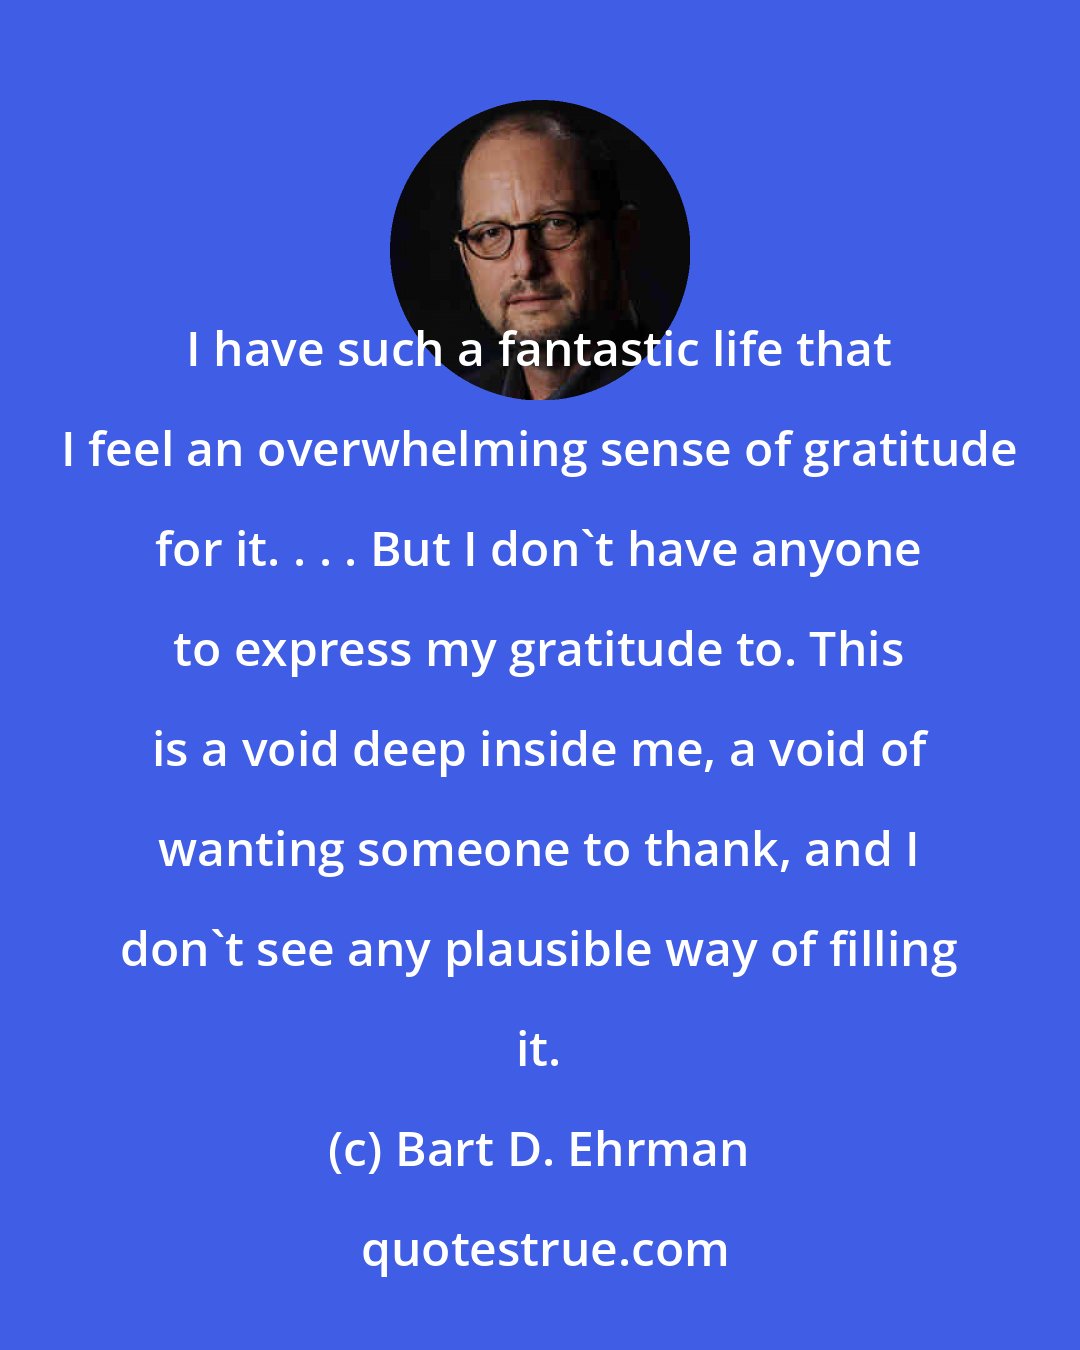 Bart D. Ehrman: I have such a fantastic life that I feel an overwhelming sense of gratitude for it. . . . But I don't have anyone to express my gratitude to. This is a void deep inside me, a void of wanting someone to thank, and I don't see any plausible way of filling it.